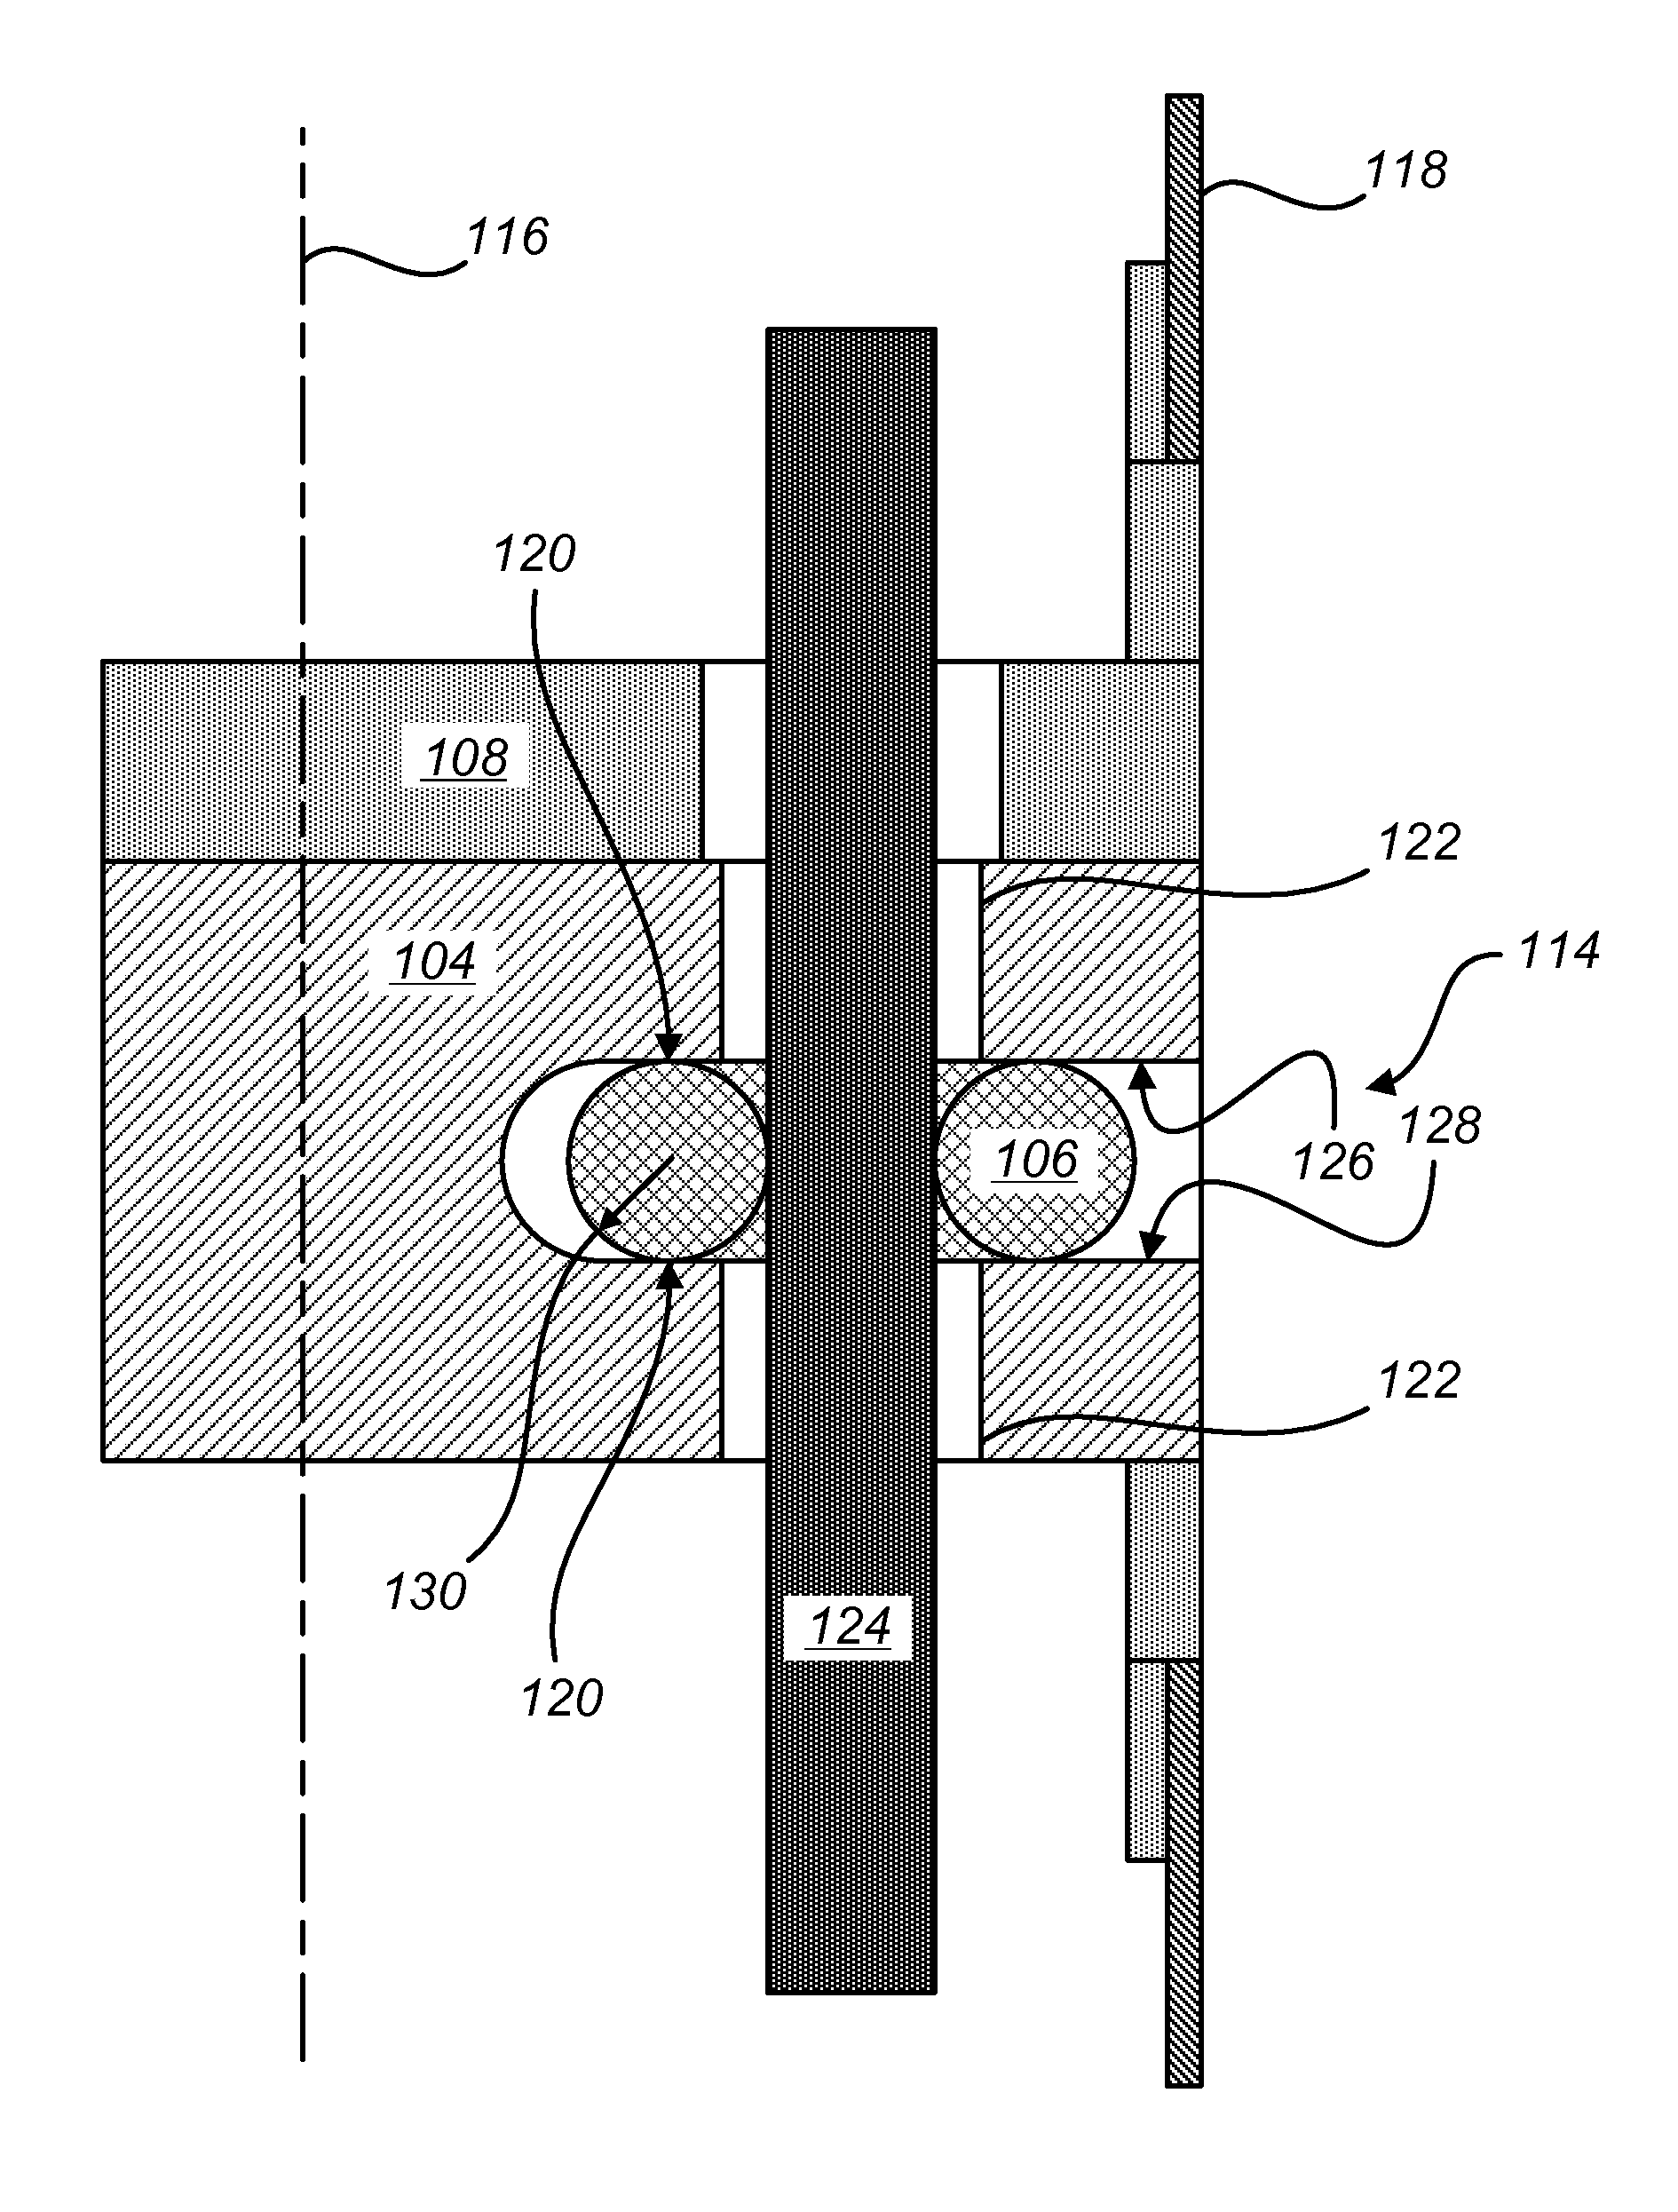 Seals and sealing methods for a surgical instrument having an articulated end effector actuated by a drive shaft